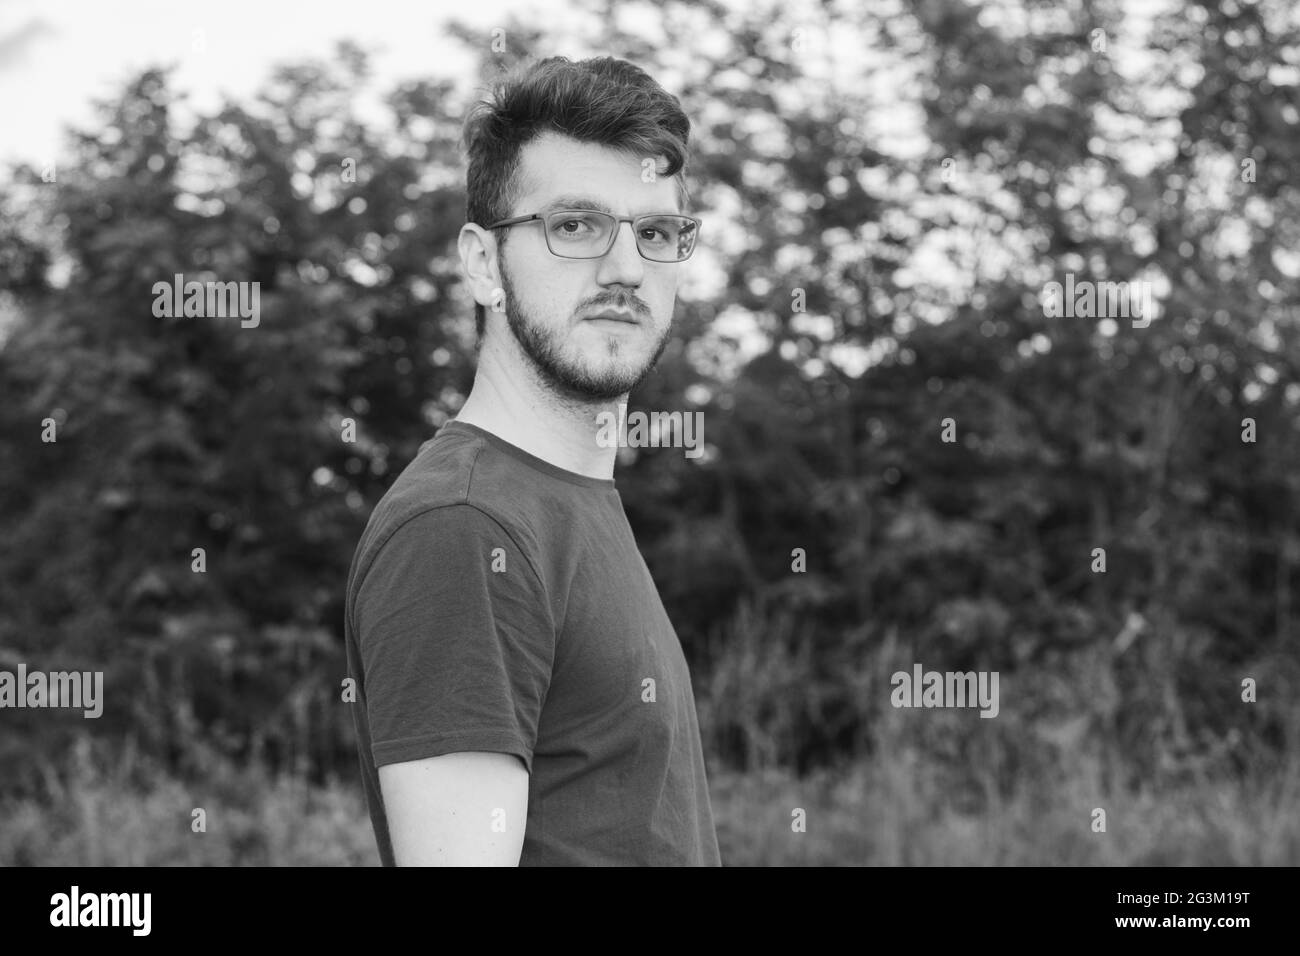 Guy with glasses Black and White Stock Photos & - Alamy